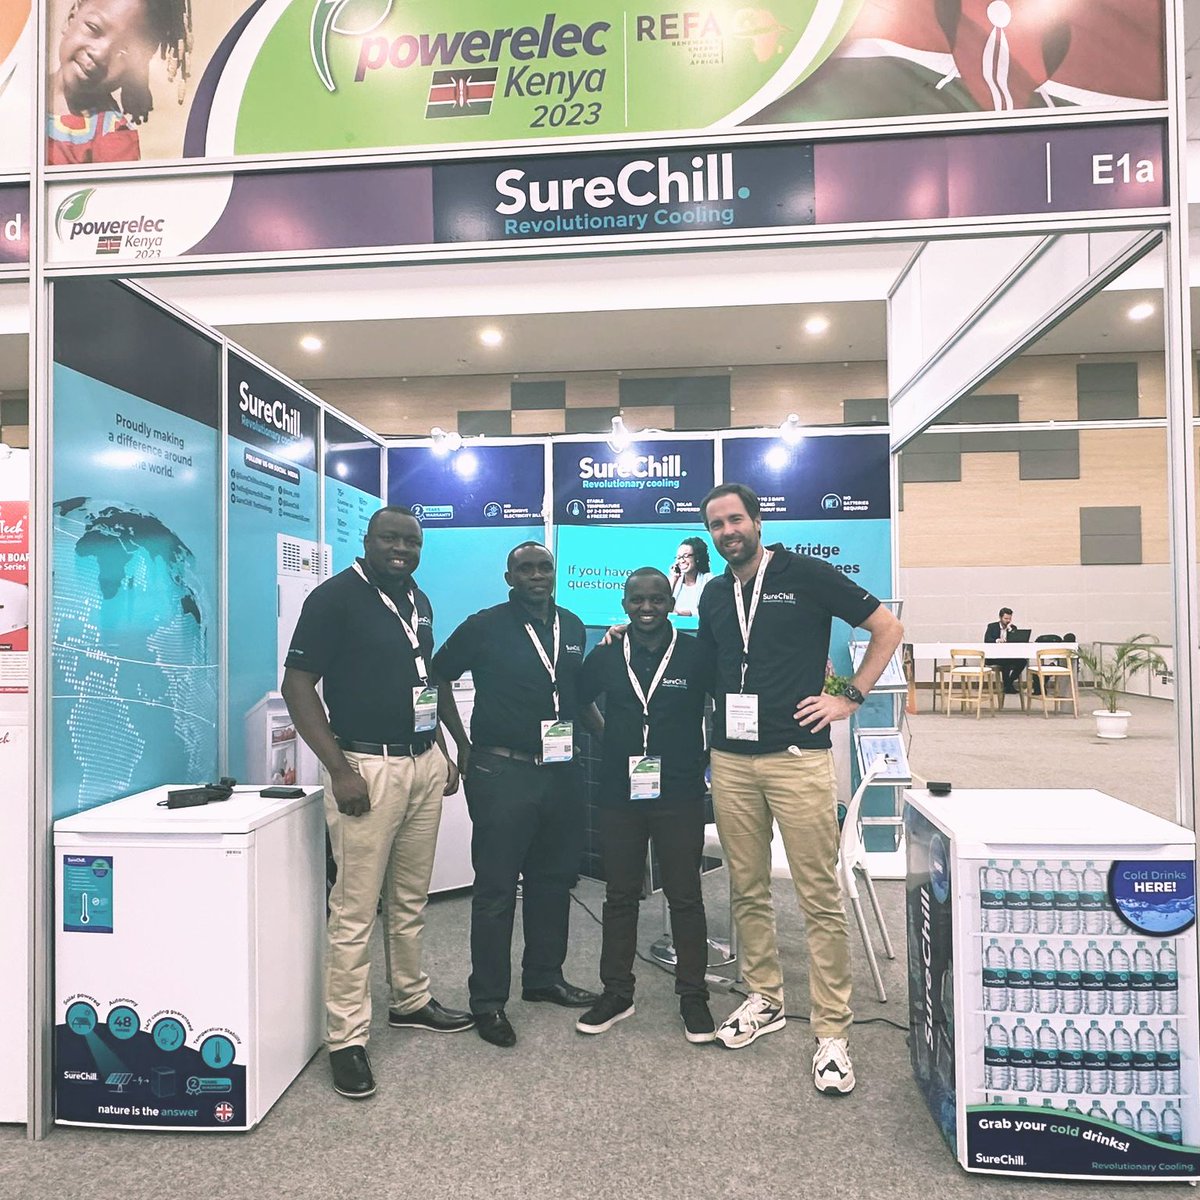 Our Kenyan team is delighted to welcome you at the booth No. E1a. If you are attending the event, make sure to stop by. Contact us to arrange a meetup at the event or to explore collaboration possibilities at hello@surechill.com. #cooling #reliable #refrigeration #Powerlec #Kenya